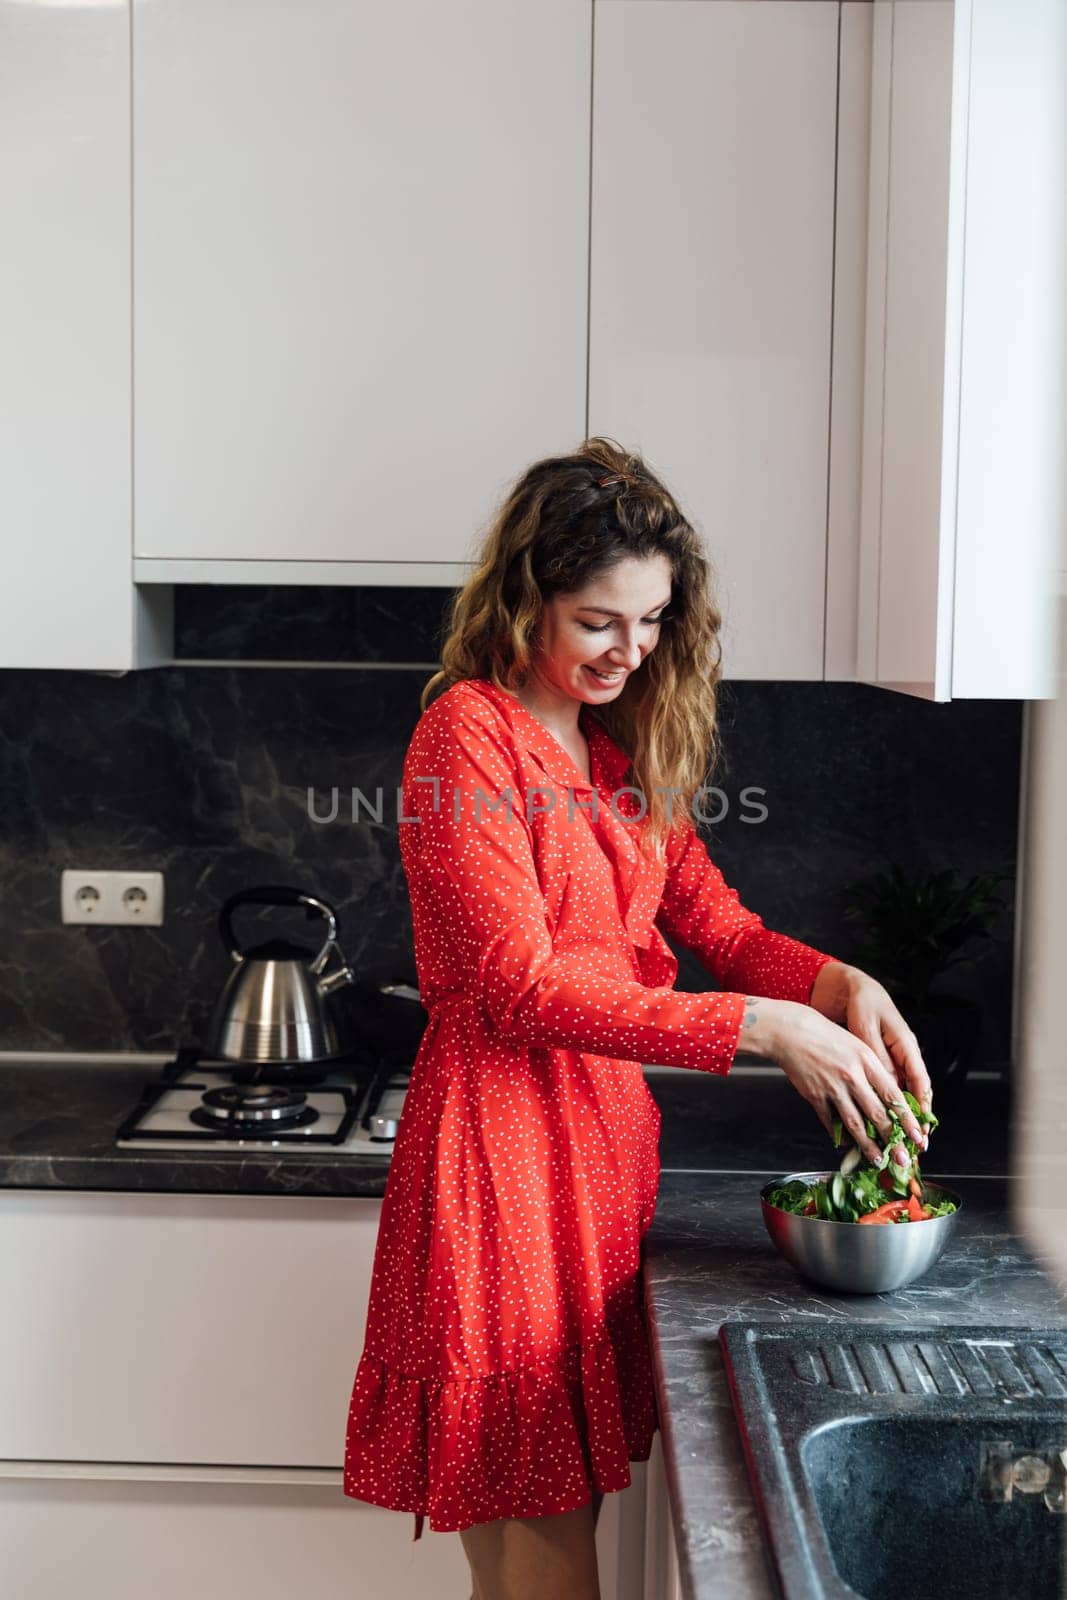 woman in a red dress prepares a salad in the kitchen